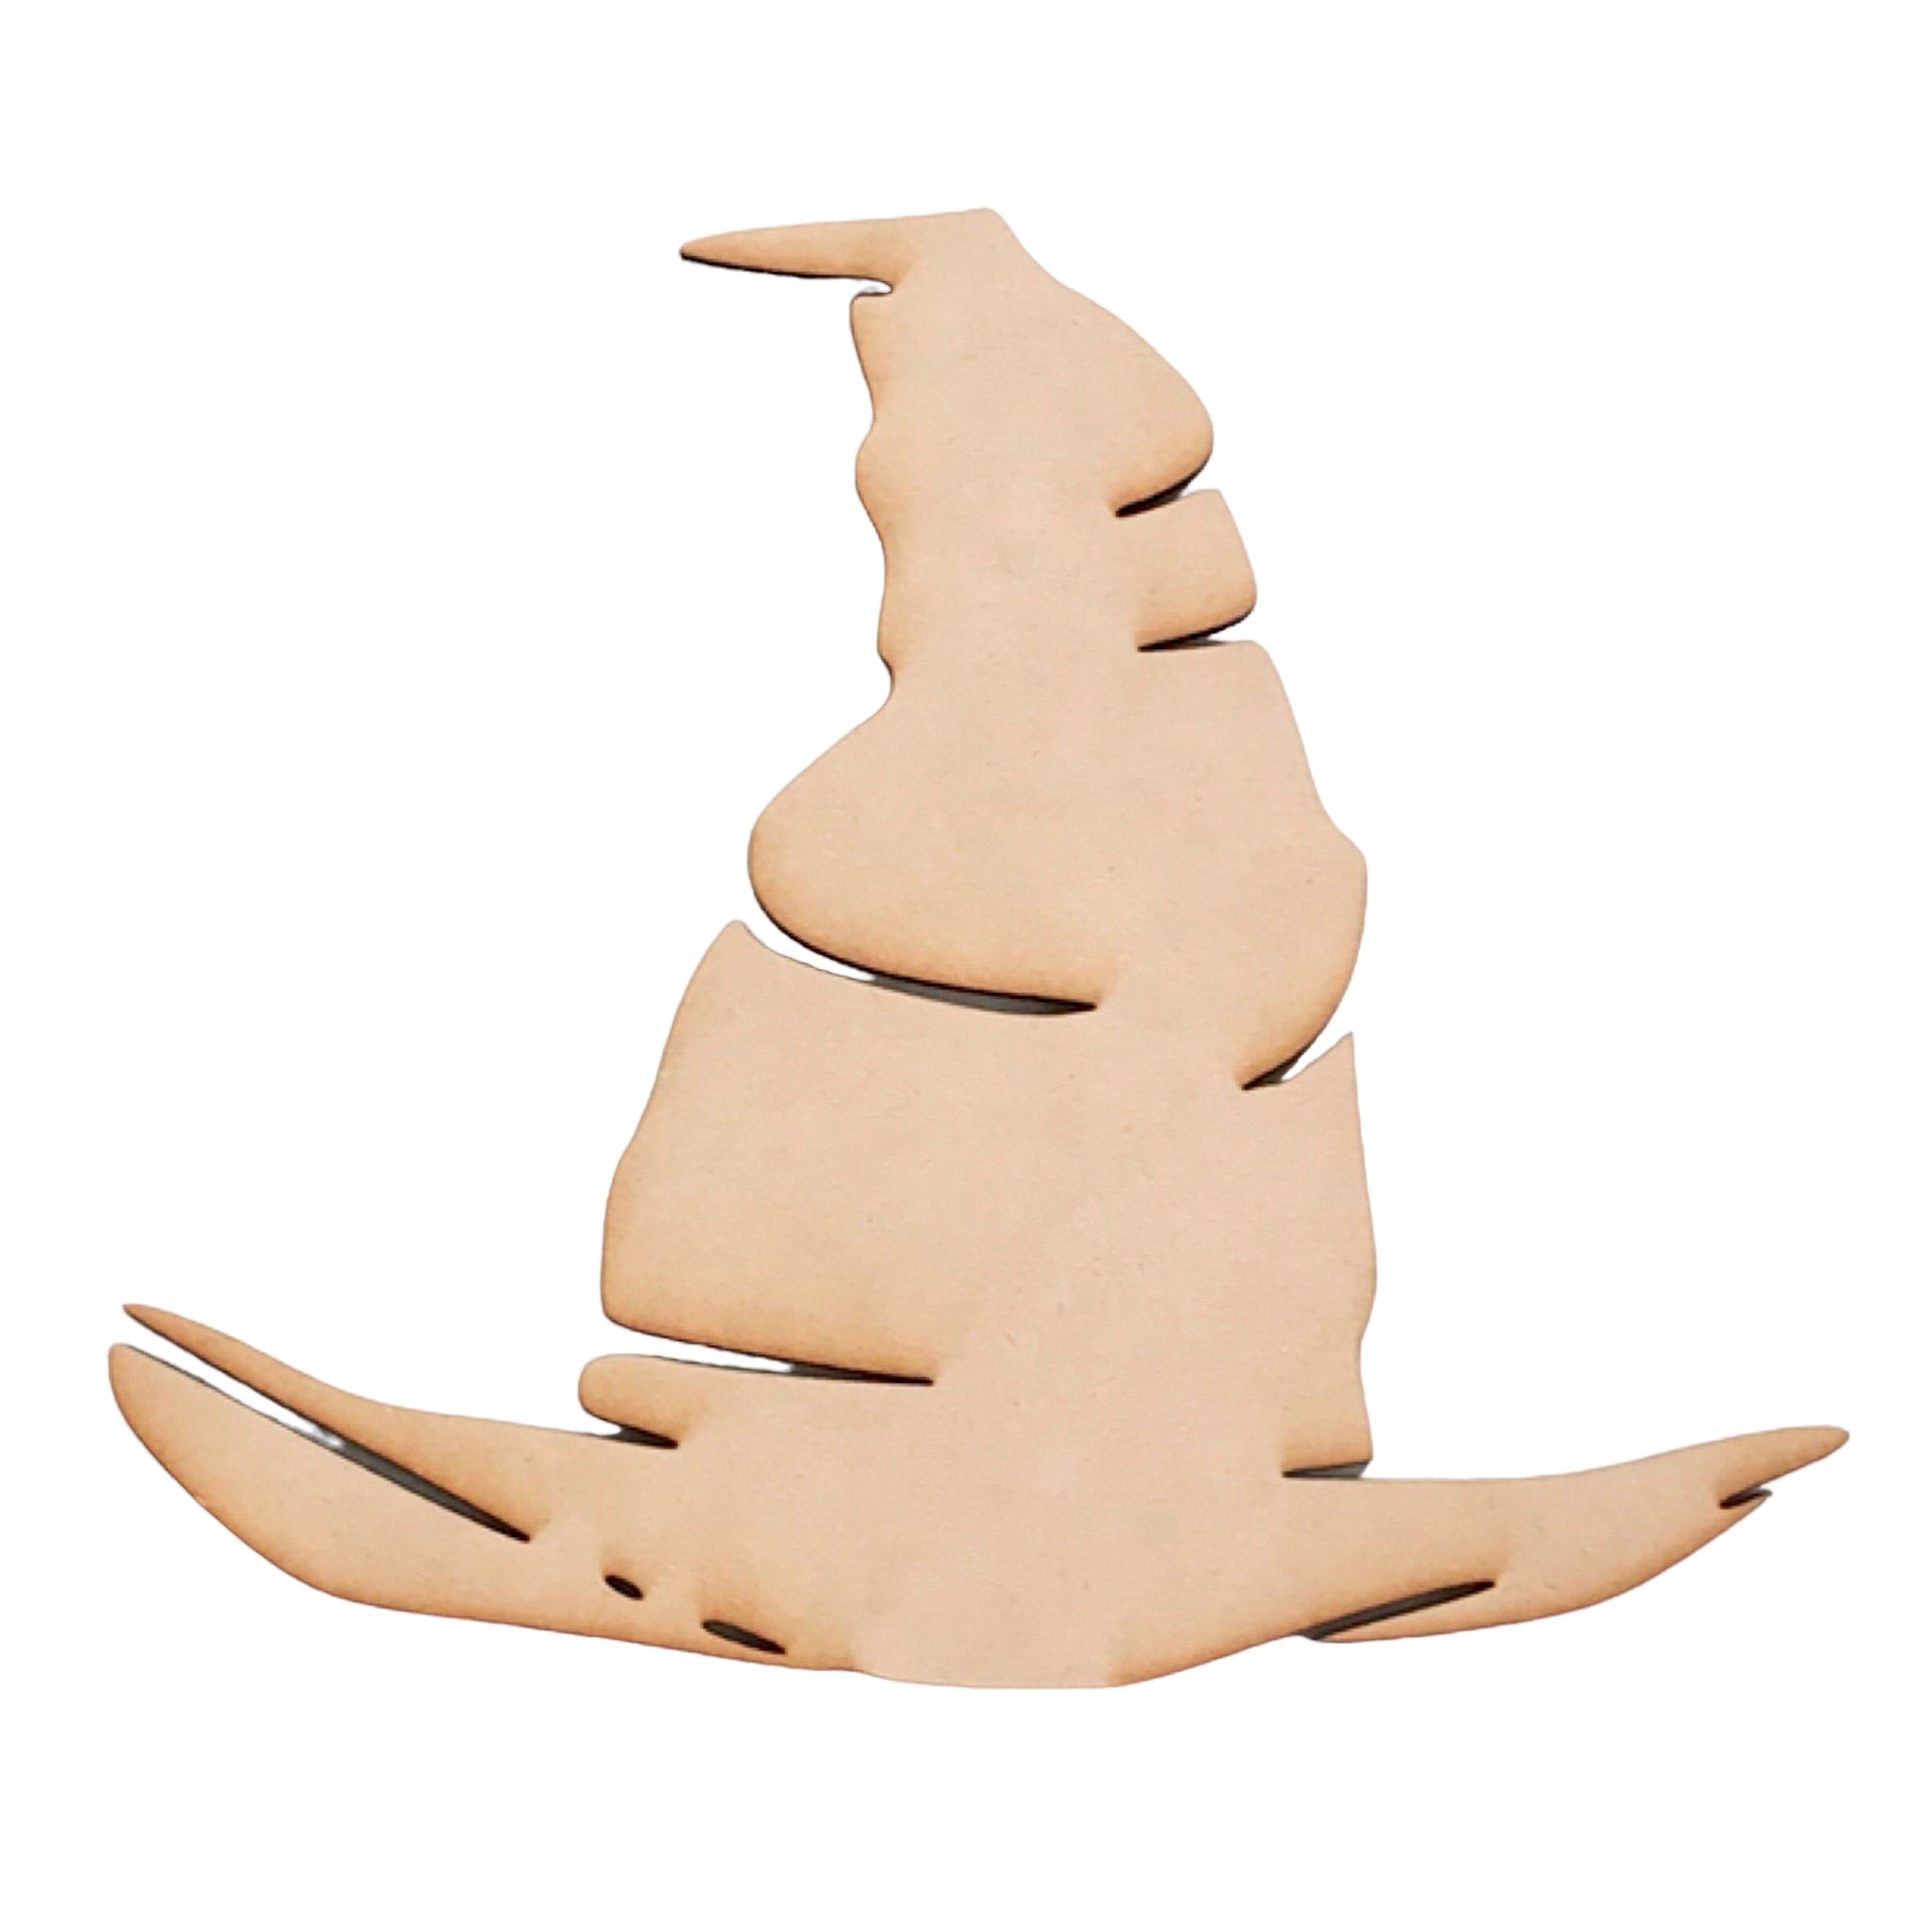 Wizard Hat MDF DIY Raw Cut Out Art Craft Decor - The Renmy Store Homewares & Gifts 